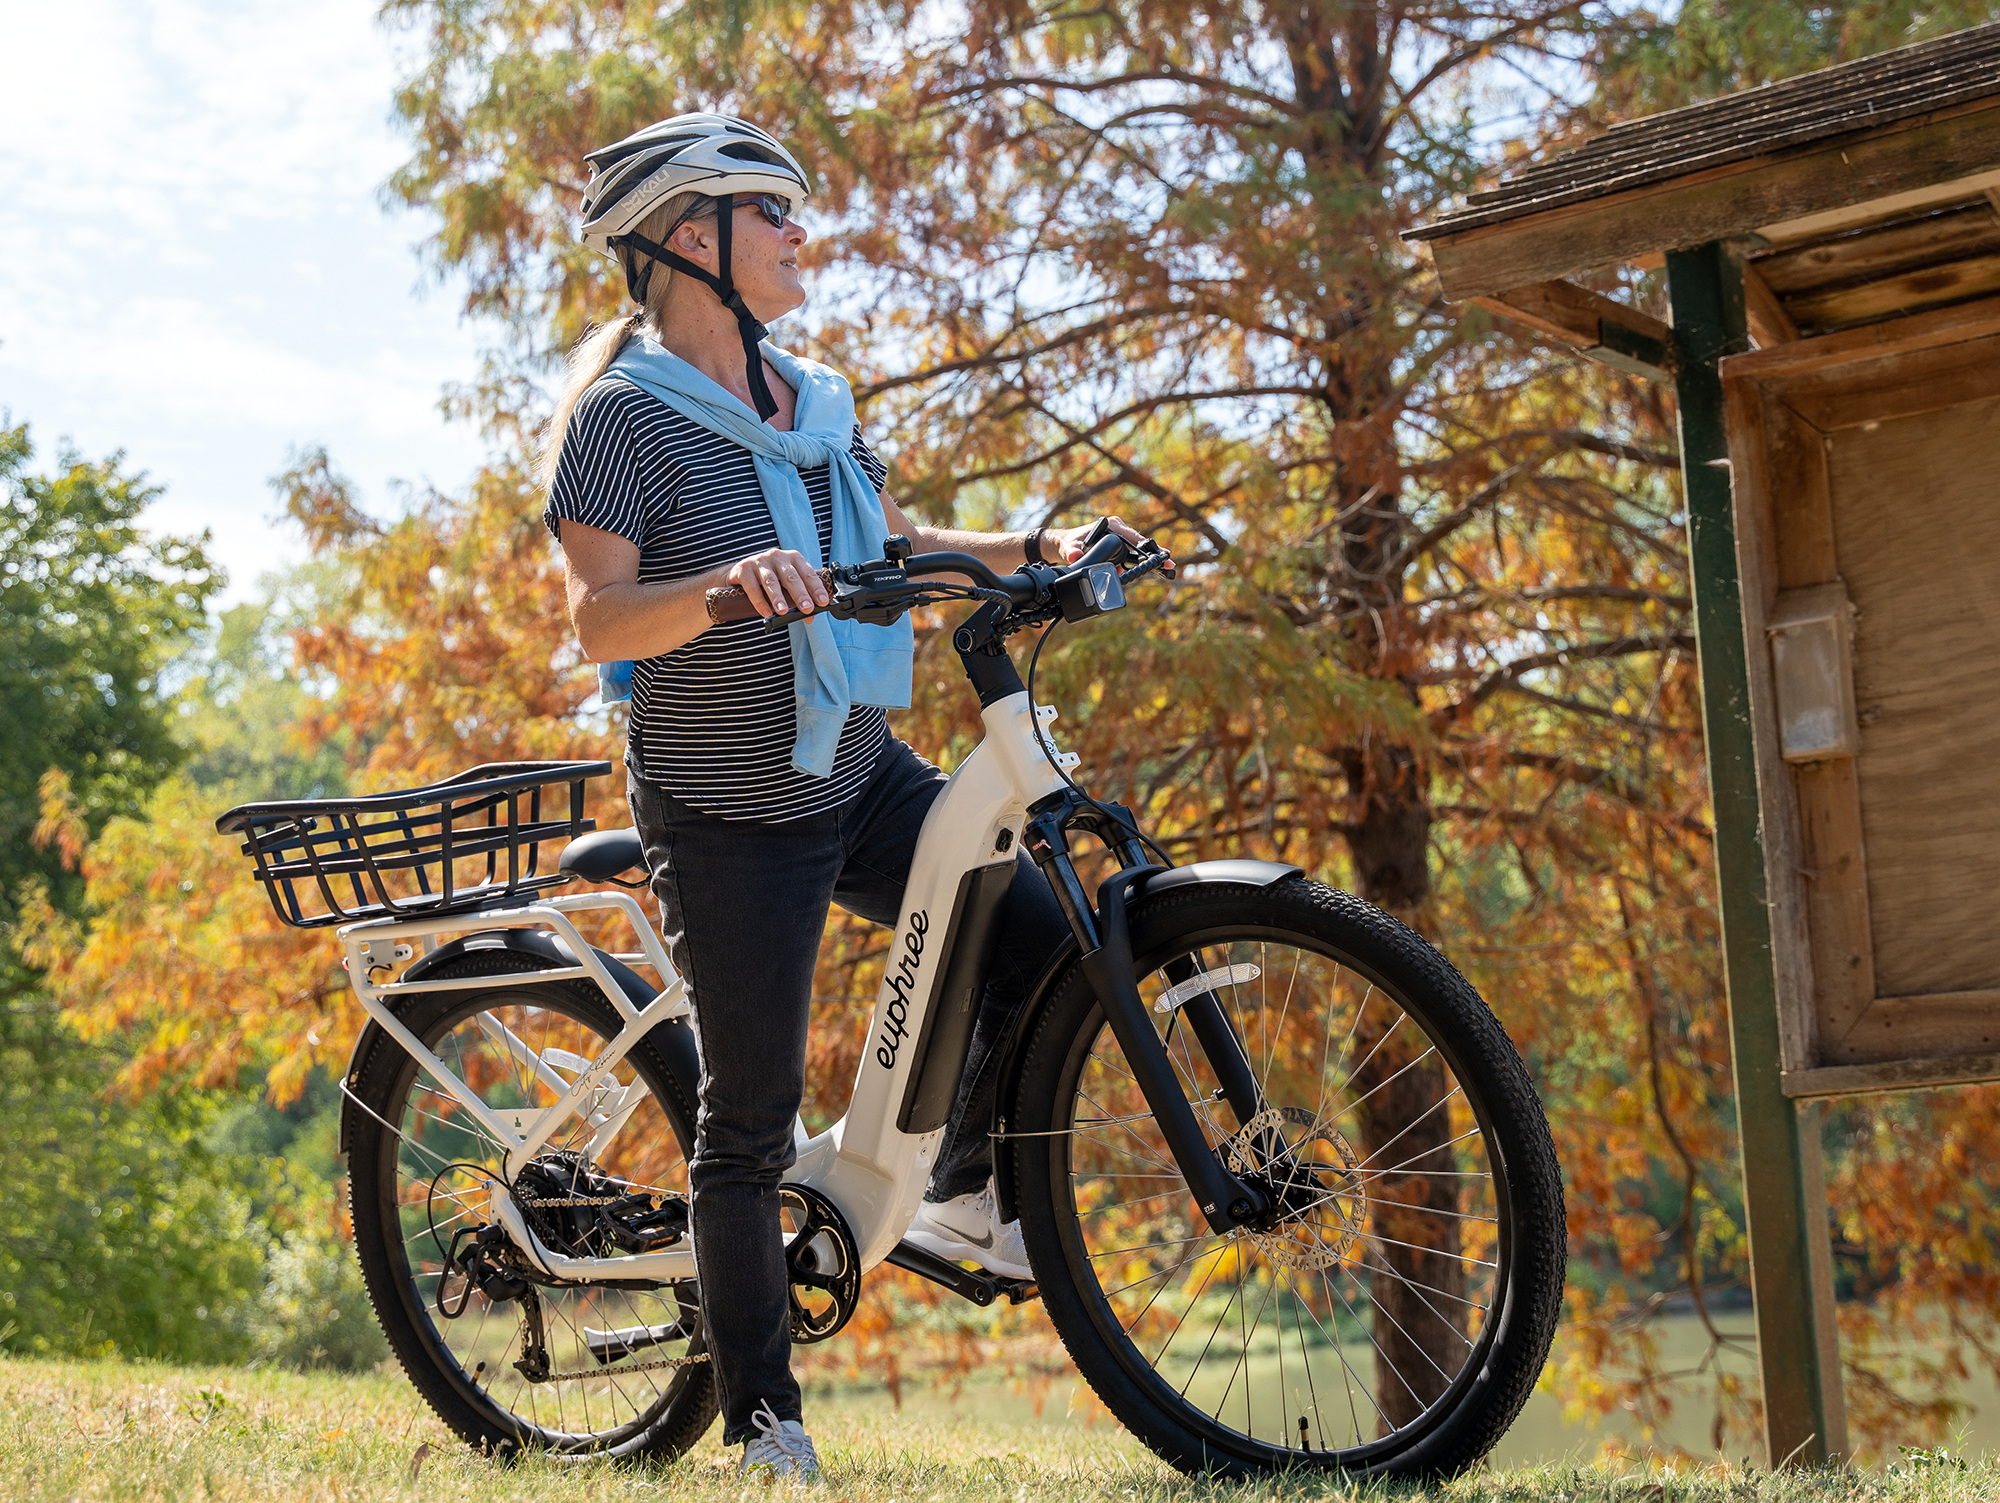 Winter Wisdom: Top 5 Ebike Maintenance Tips for a Smooth Ride